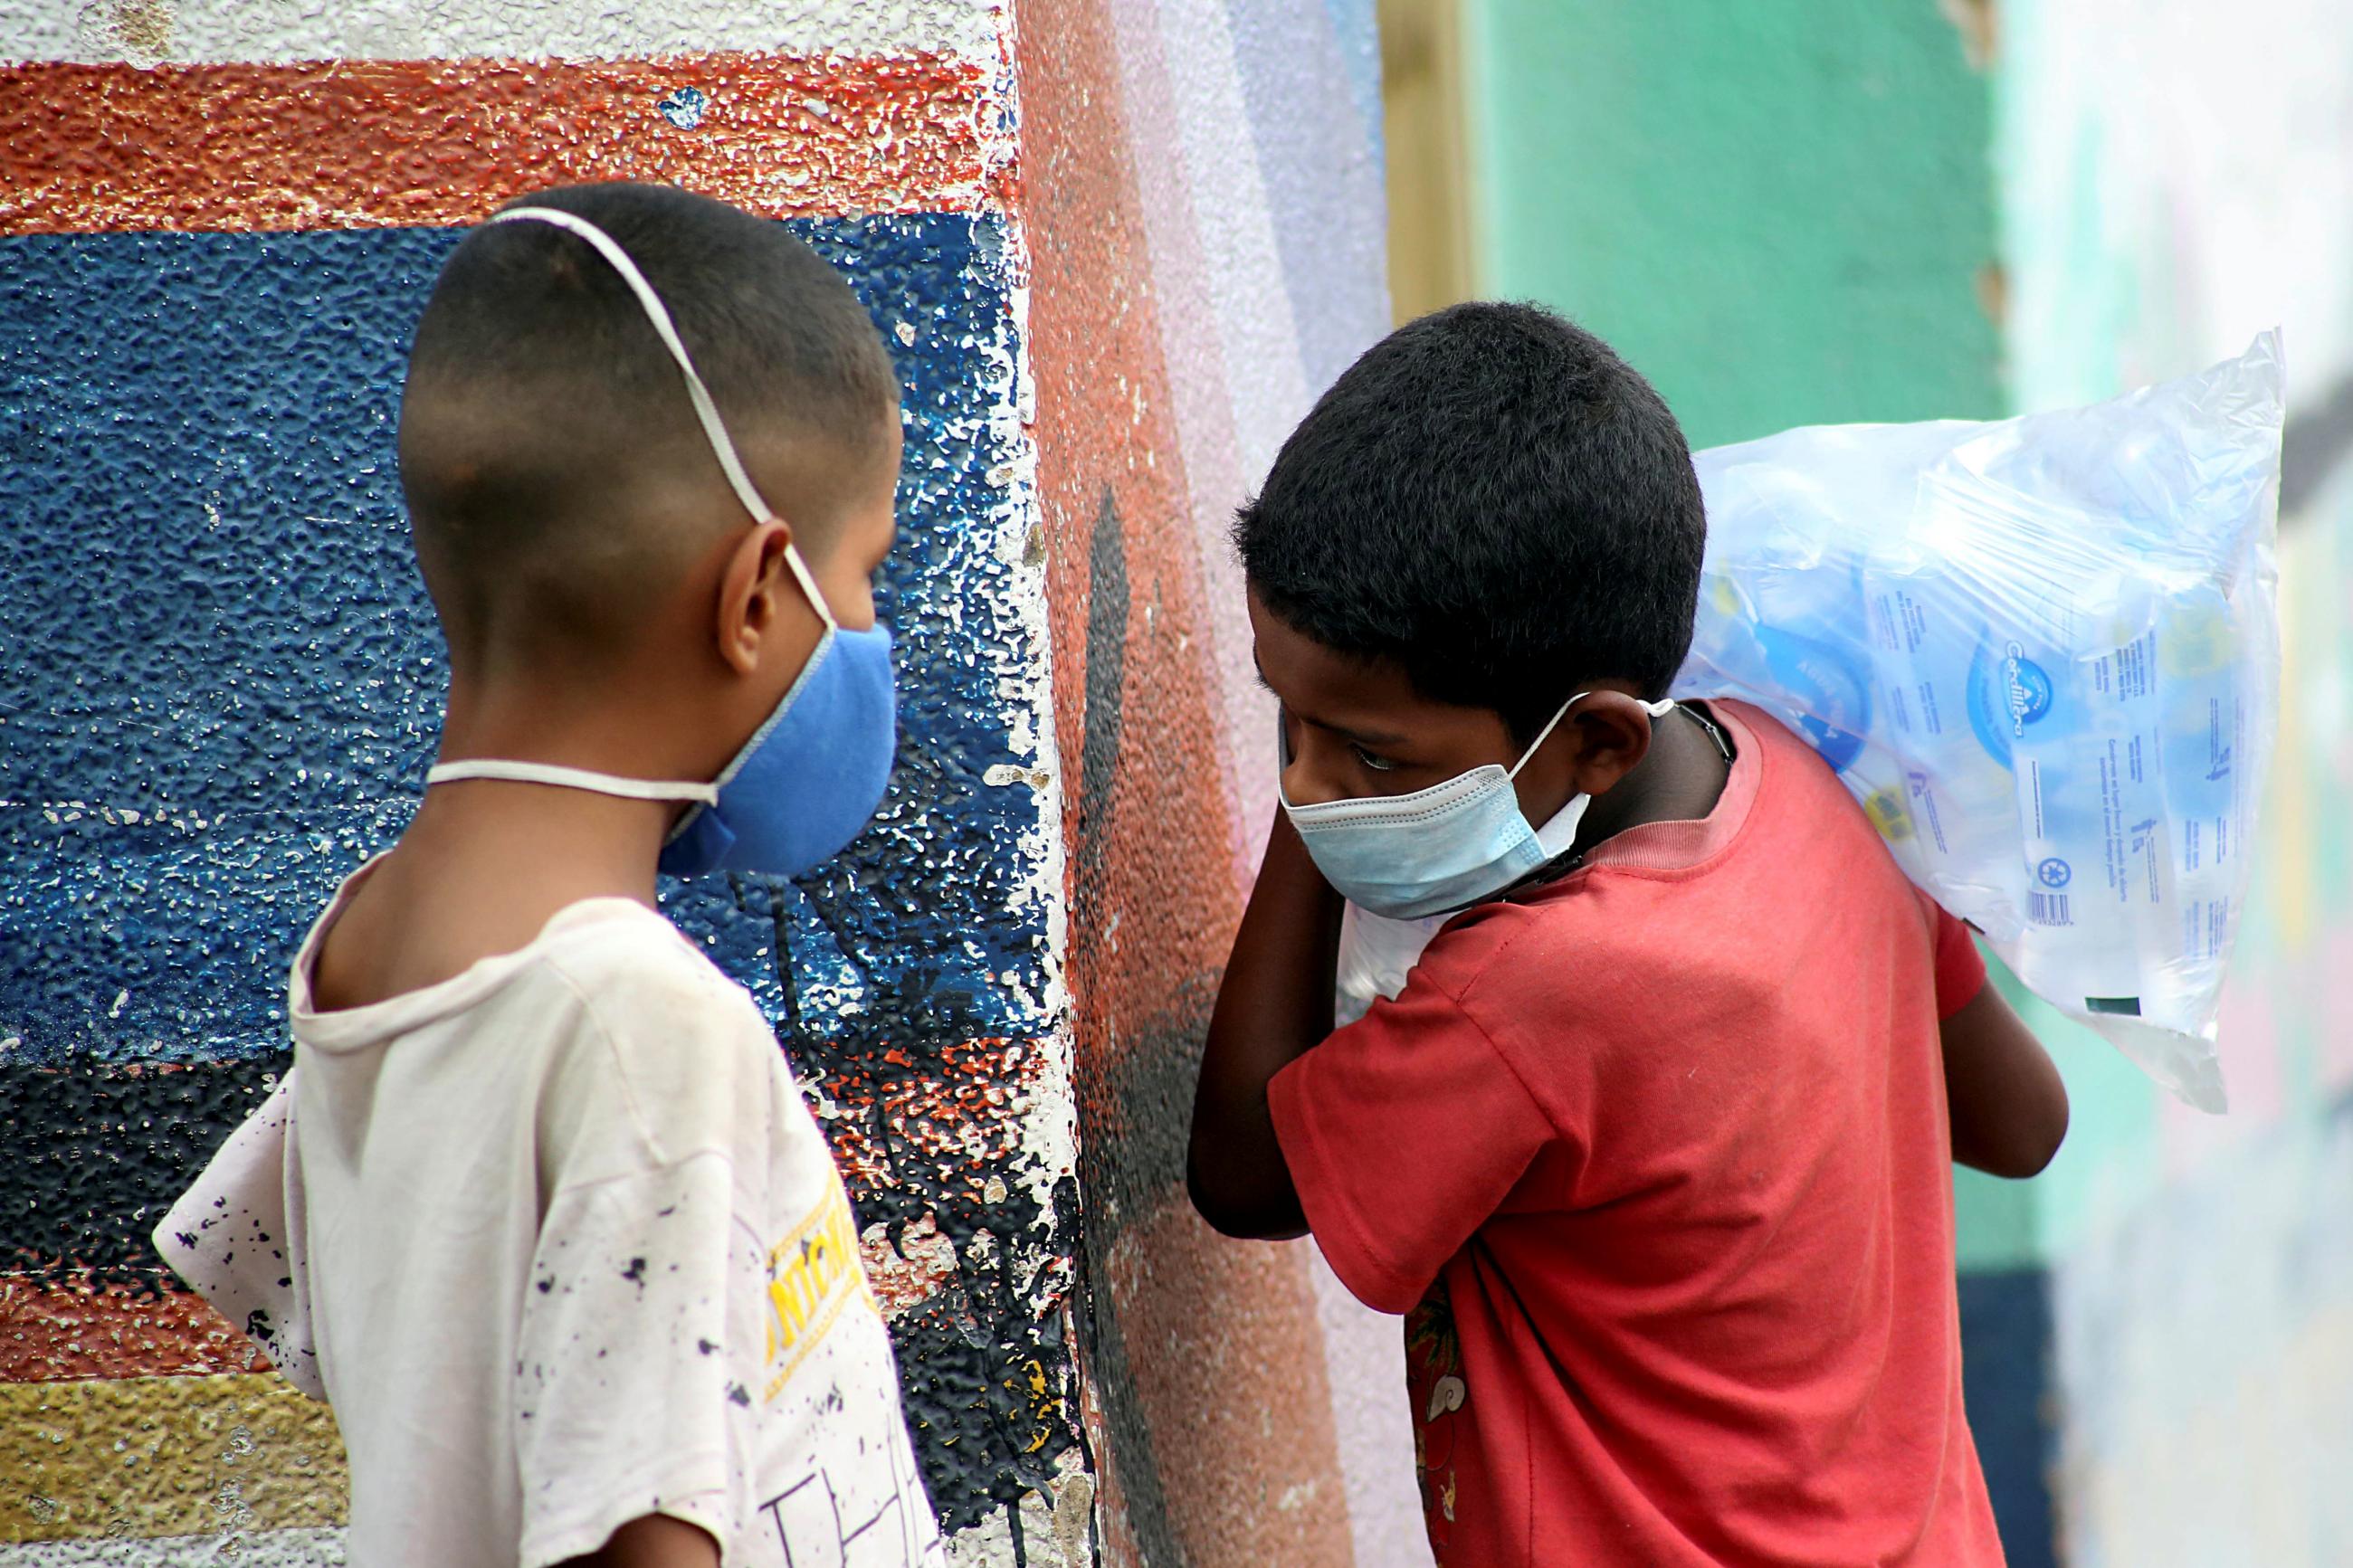 Children in face masks near the Venezuelan-Colombia border after the Colombian government closed the Simón Bolívar International Bridge as a preventive measure in response to COVID spreading in San Antonio, Tachira, Venezuela. Photo taken on March 14, 2020.